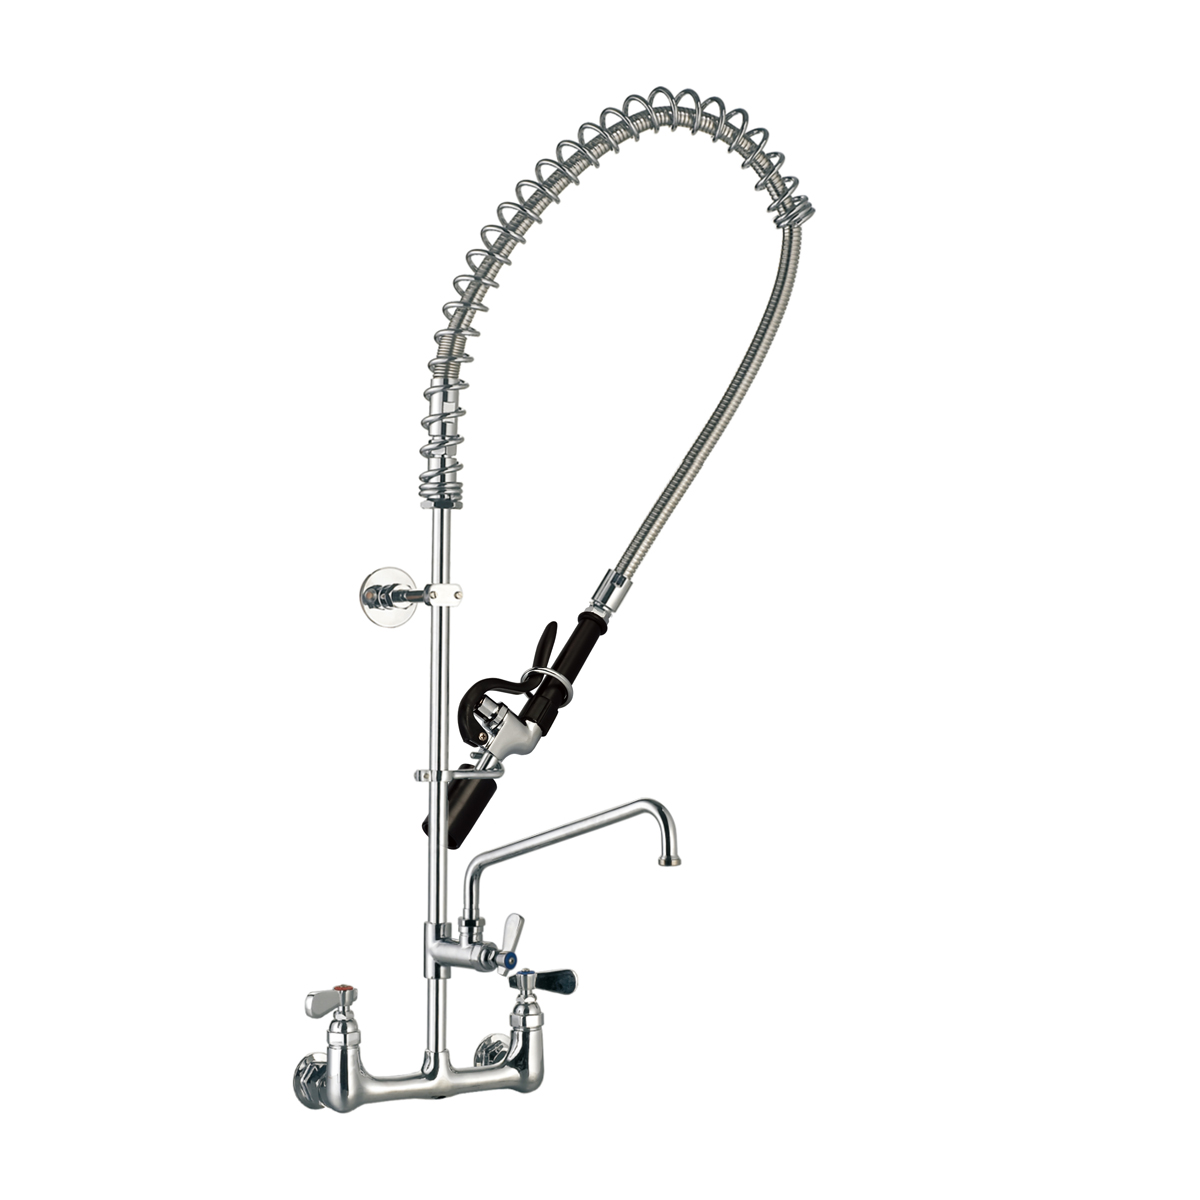 Tap Pre-Rinse Faucet Assembly with 44" SS Flexible Hose and 12" Add-On Faucet, Not Used